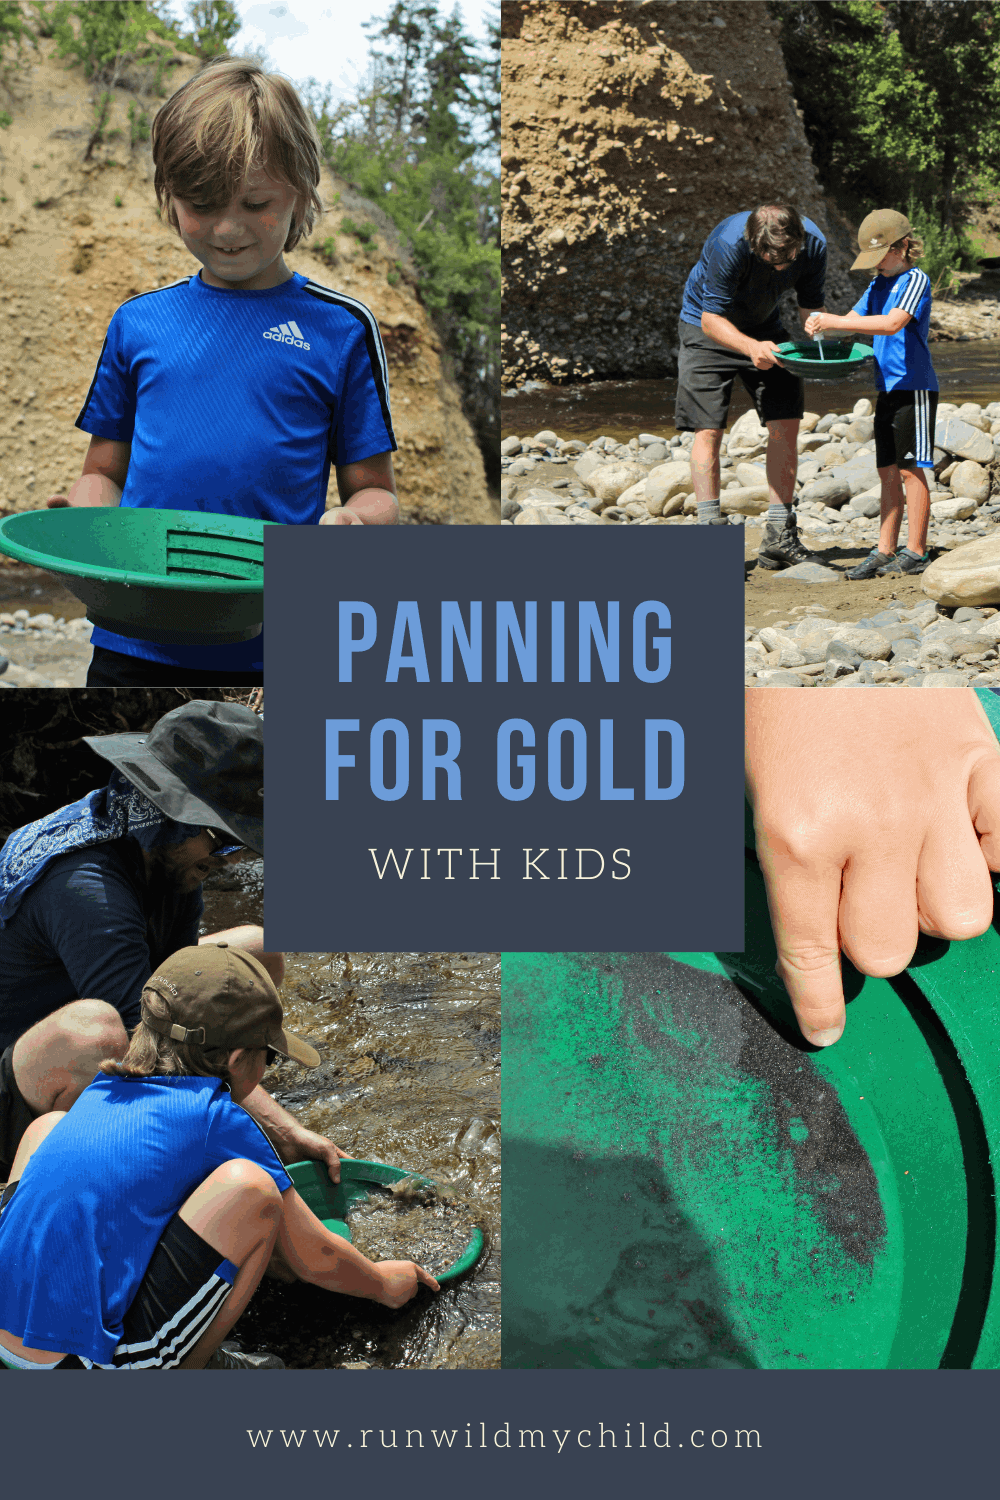 How to Go Panning for Gold With Kids